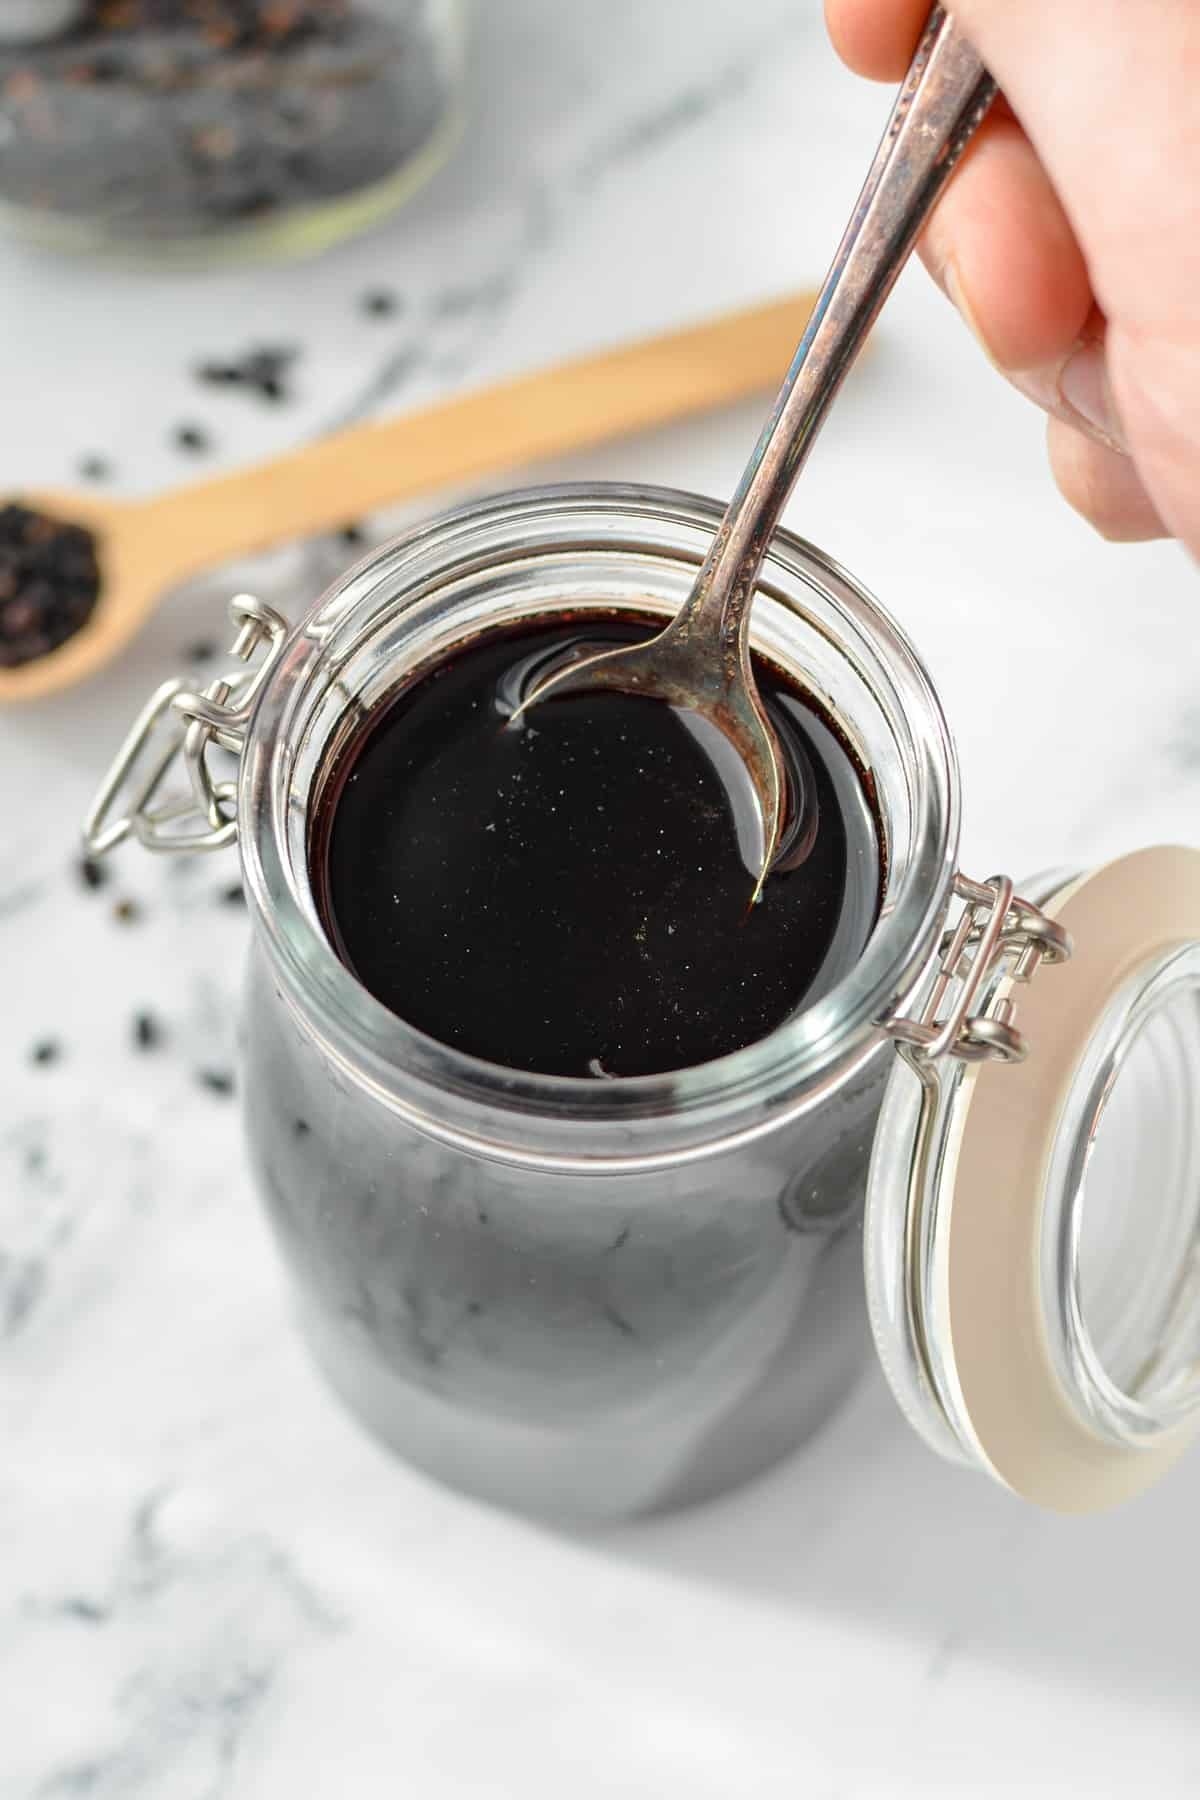 Using a spoon to take elderberry syrup from a jar.